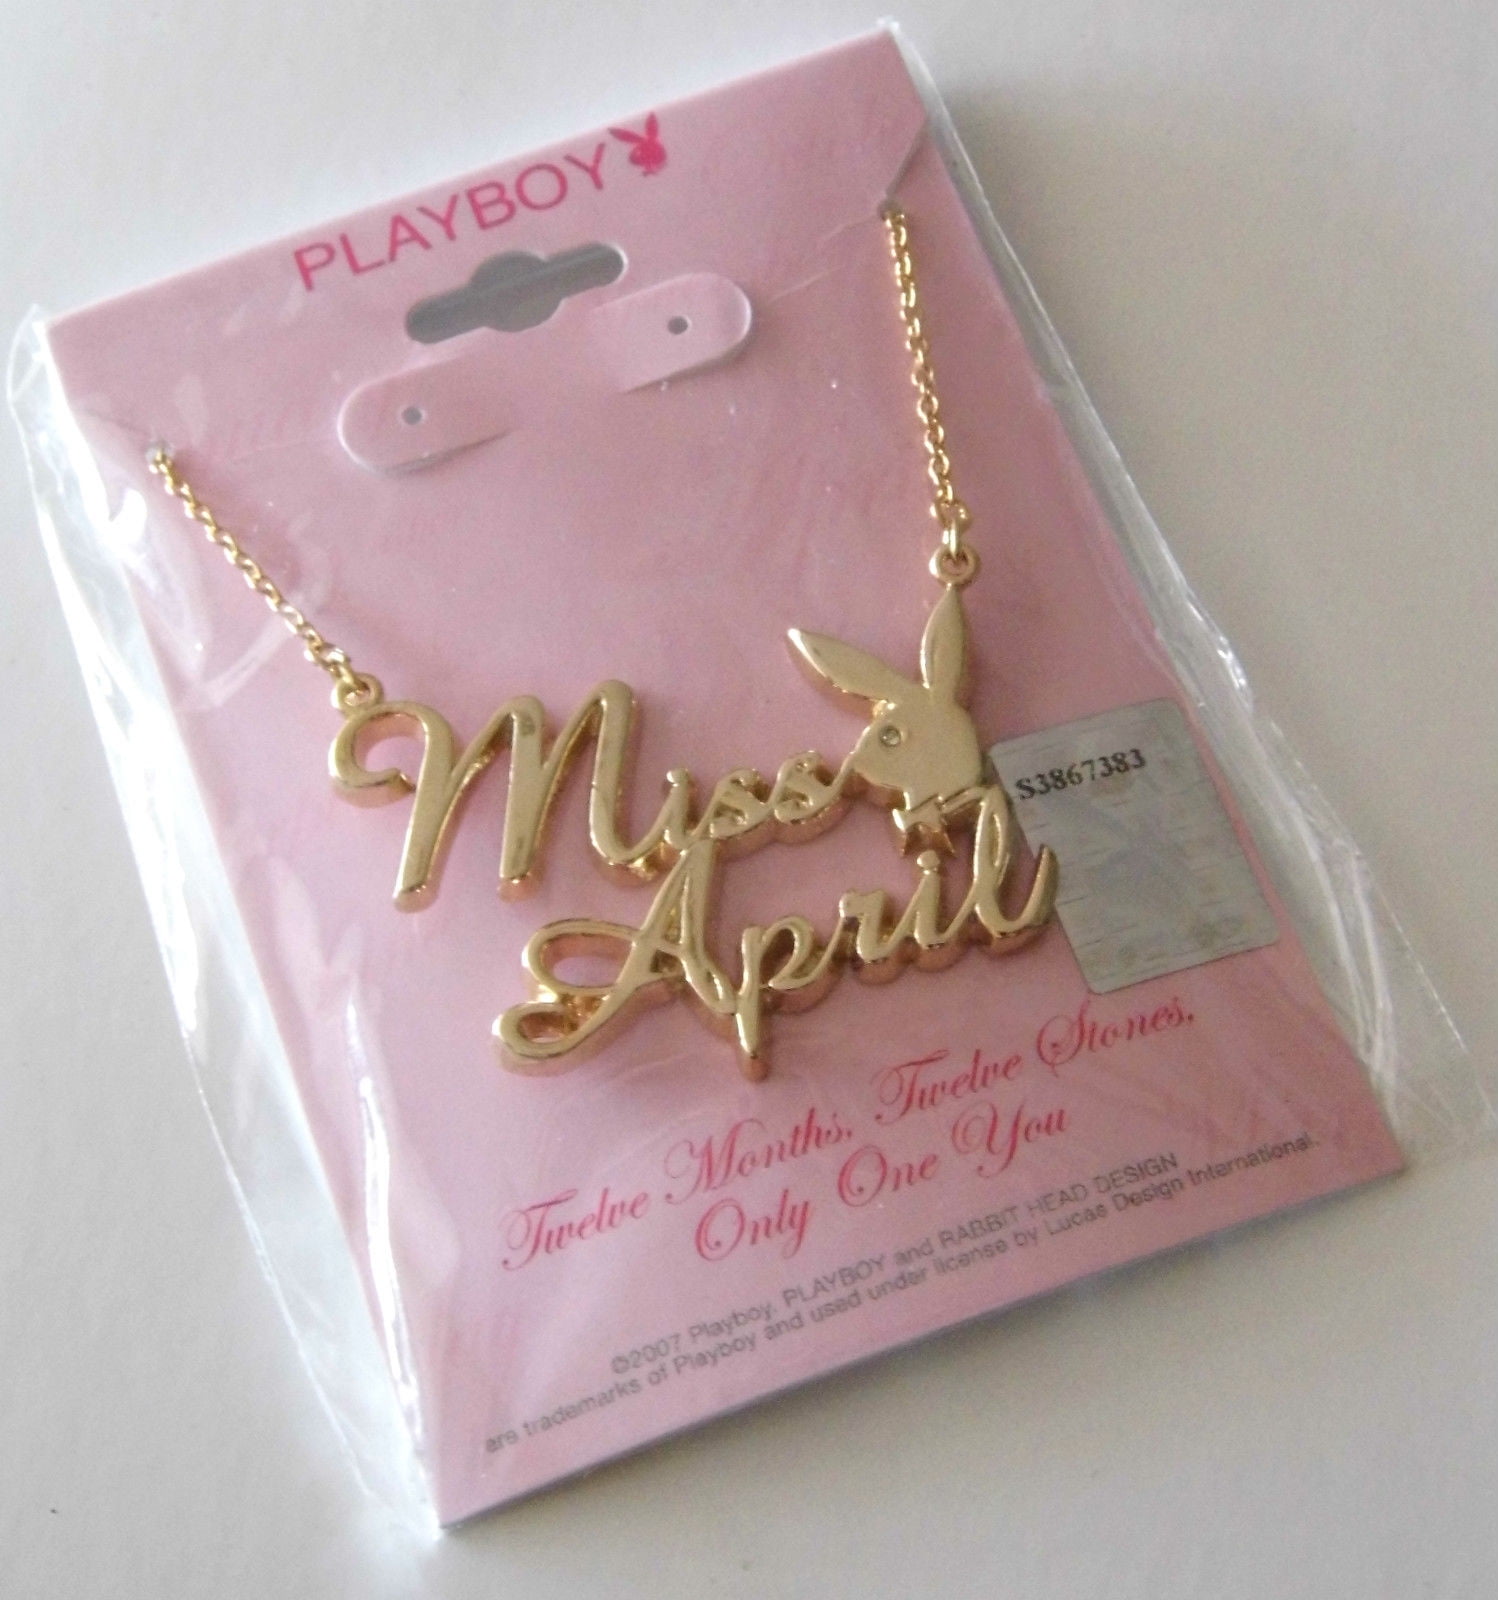 NEW PLAYBOY WOMEN'S MONTH OF THE YEAR NECKLACE APRIL 